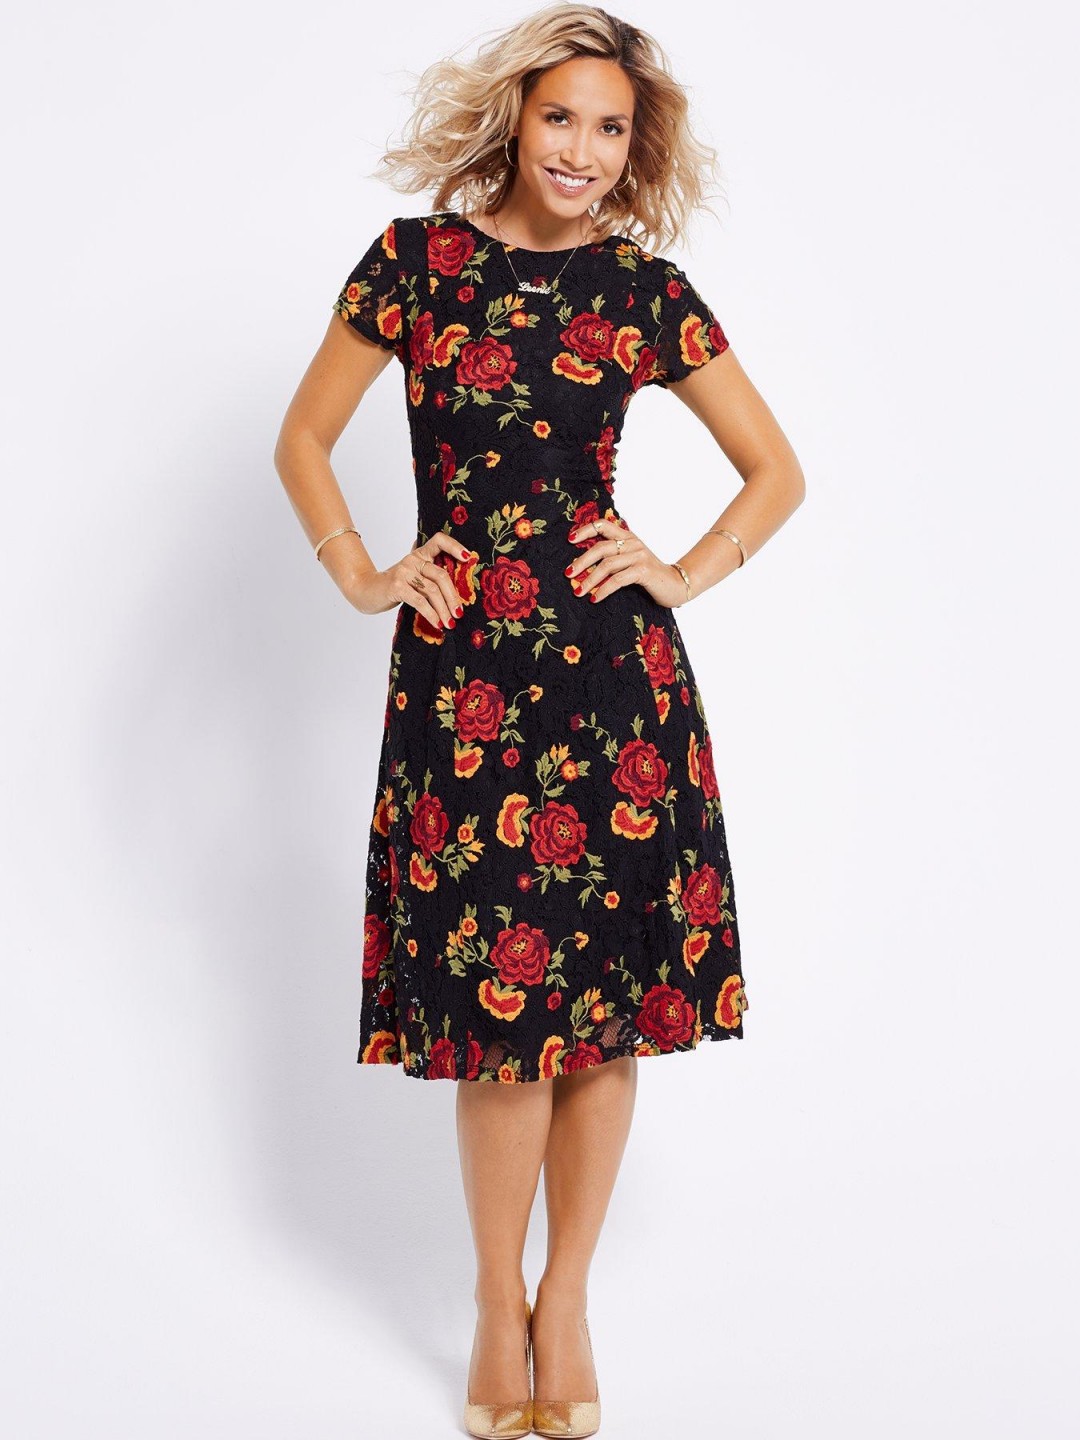 Dresses To Love From Very – JacquardFlower